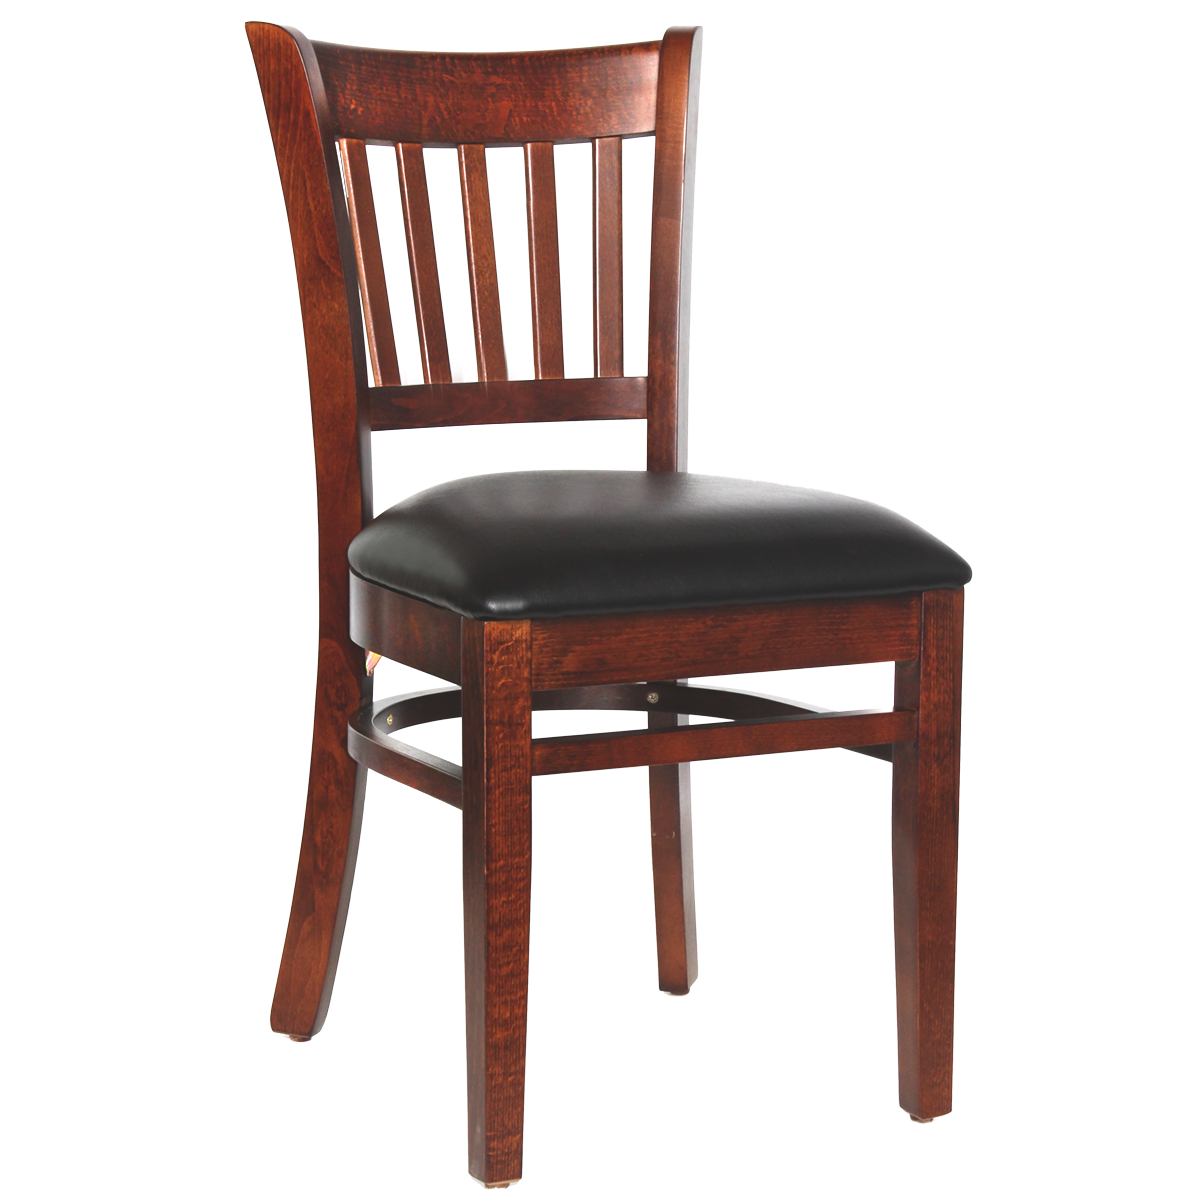 wood chairs for restaurant seating, commercial wood with upholstered seat or solid wood seat